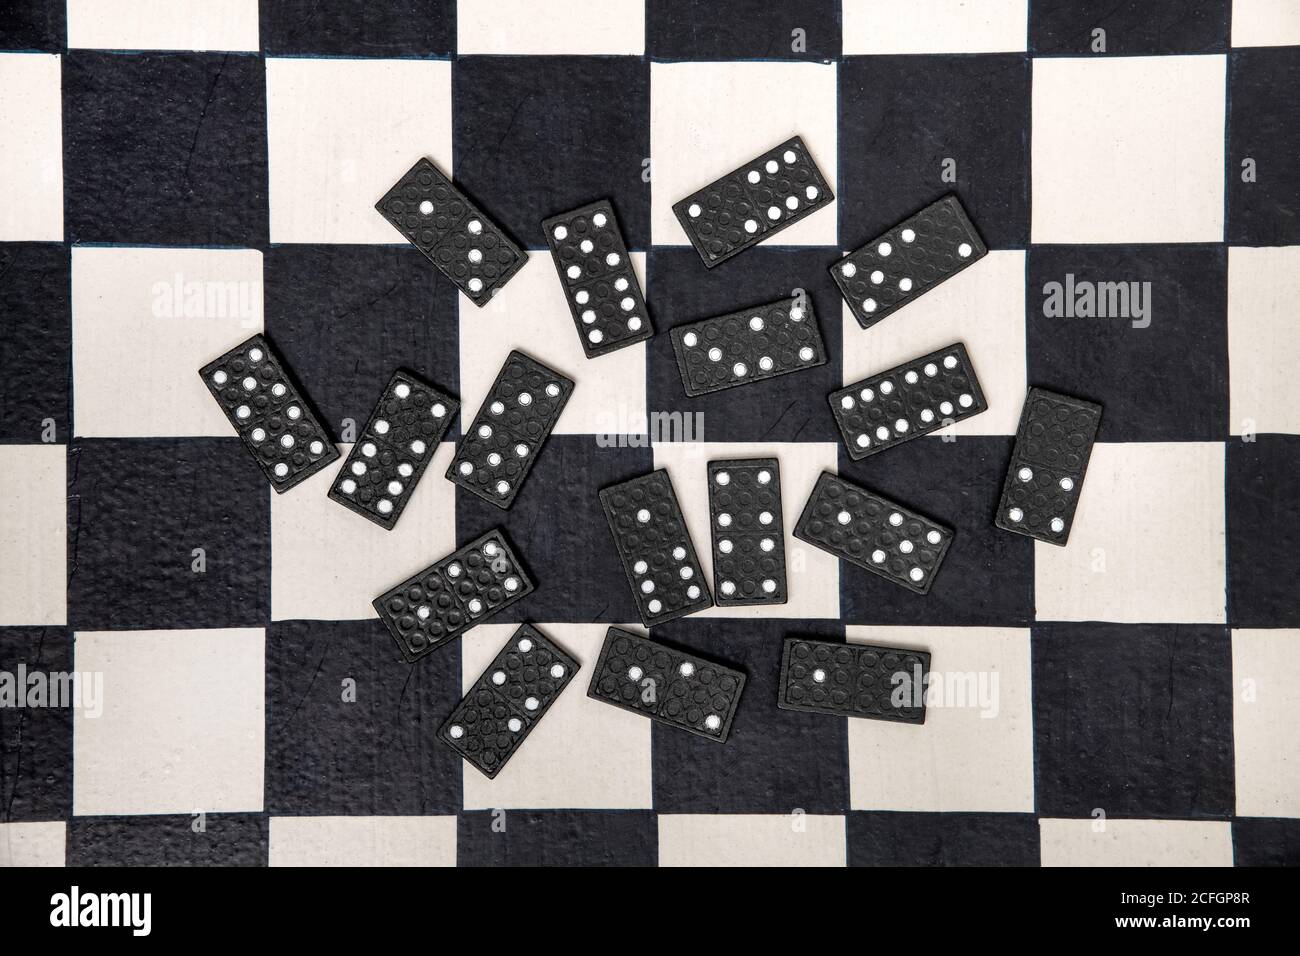 Randomly scattered black domino tiles on a black and white chessboard viewed from above in a concept of personal entertainment Stock Photo